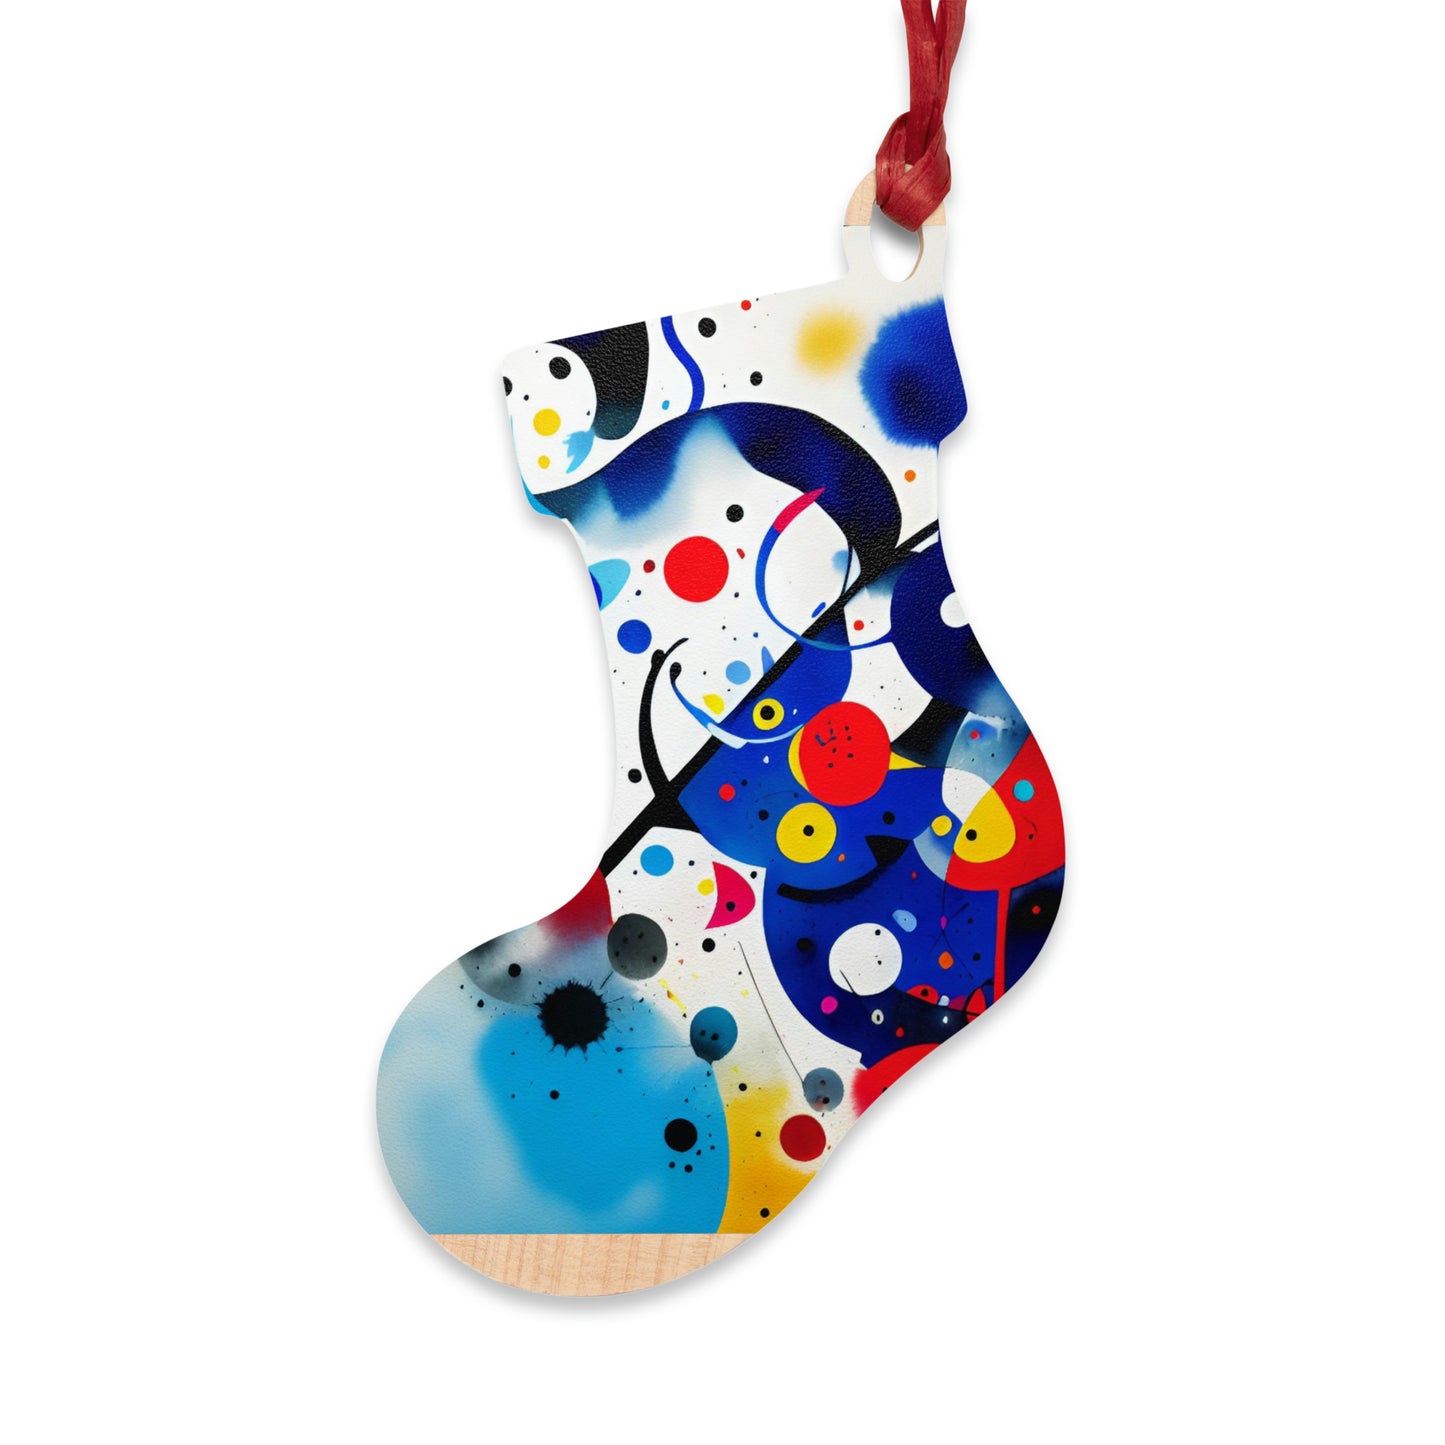 Wooden Ornaments, Inspired by Miro